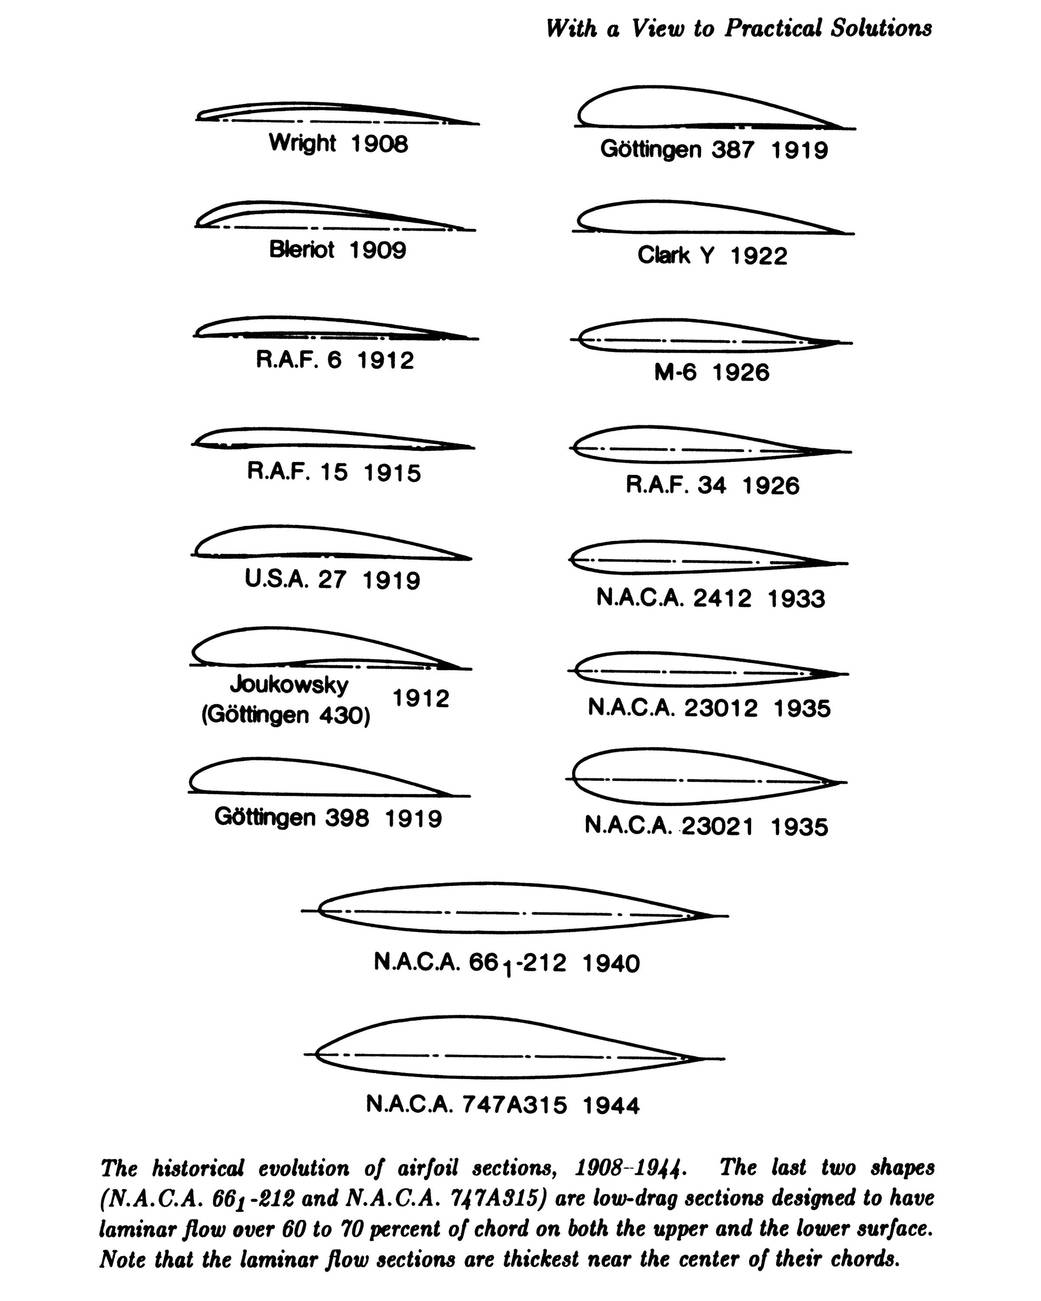 The historical evolution of airfoil sections from 1908-1944.